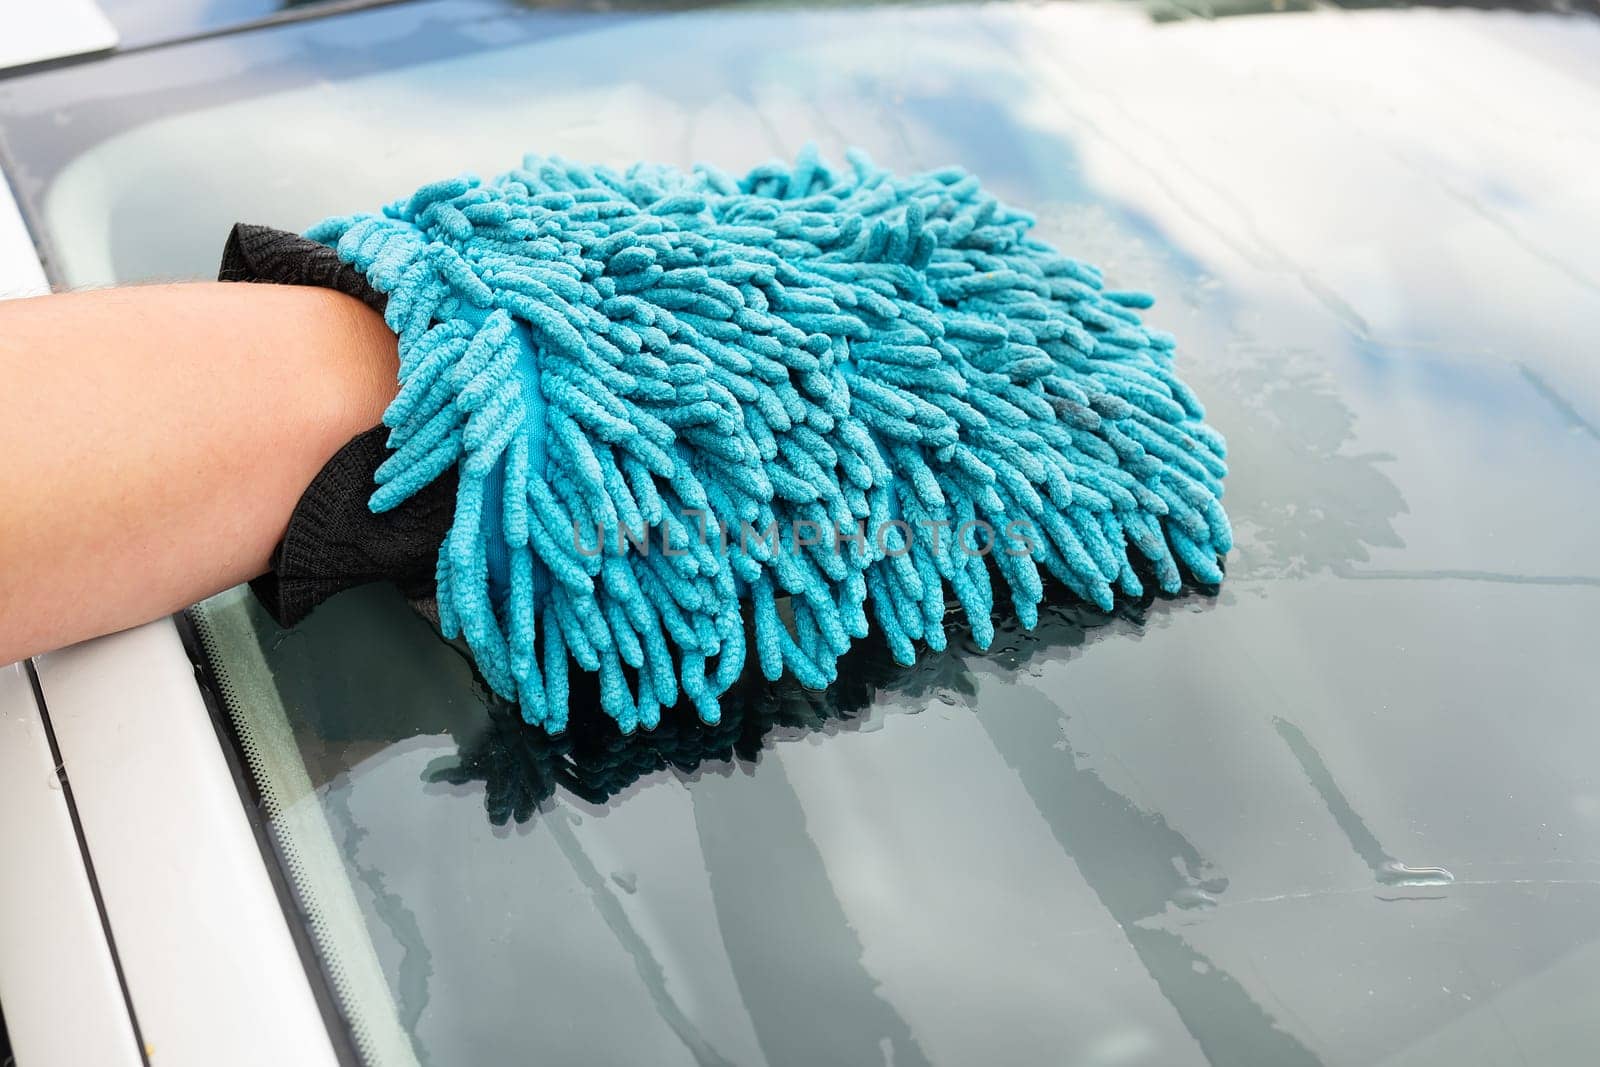 A man washes the car windshield with a large blue washcloth. Car wash, self-service